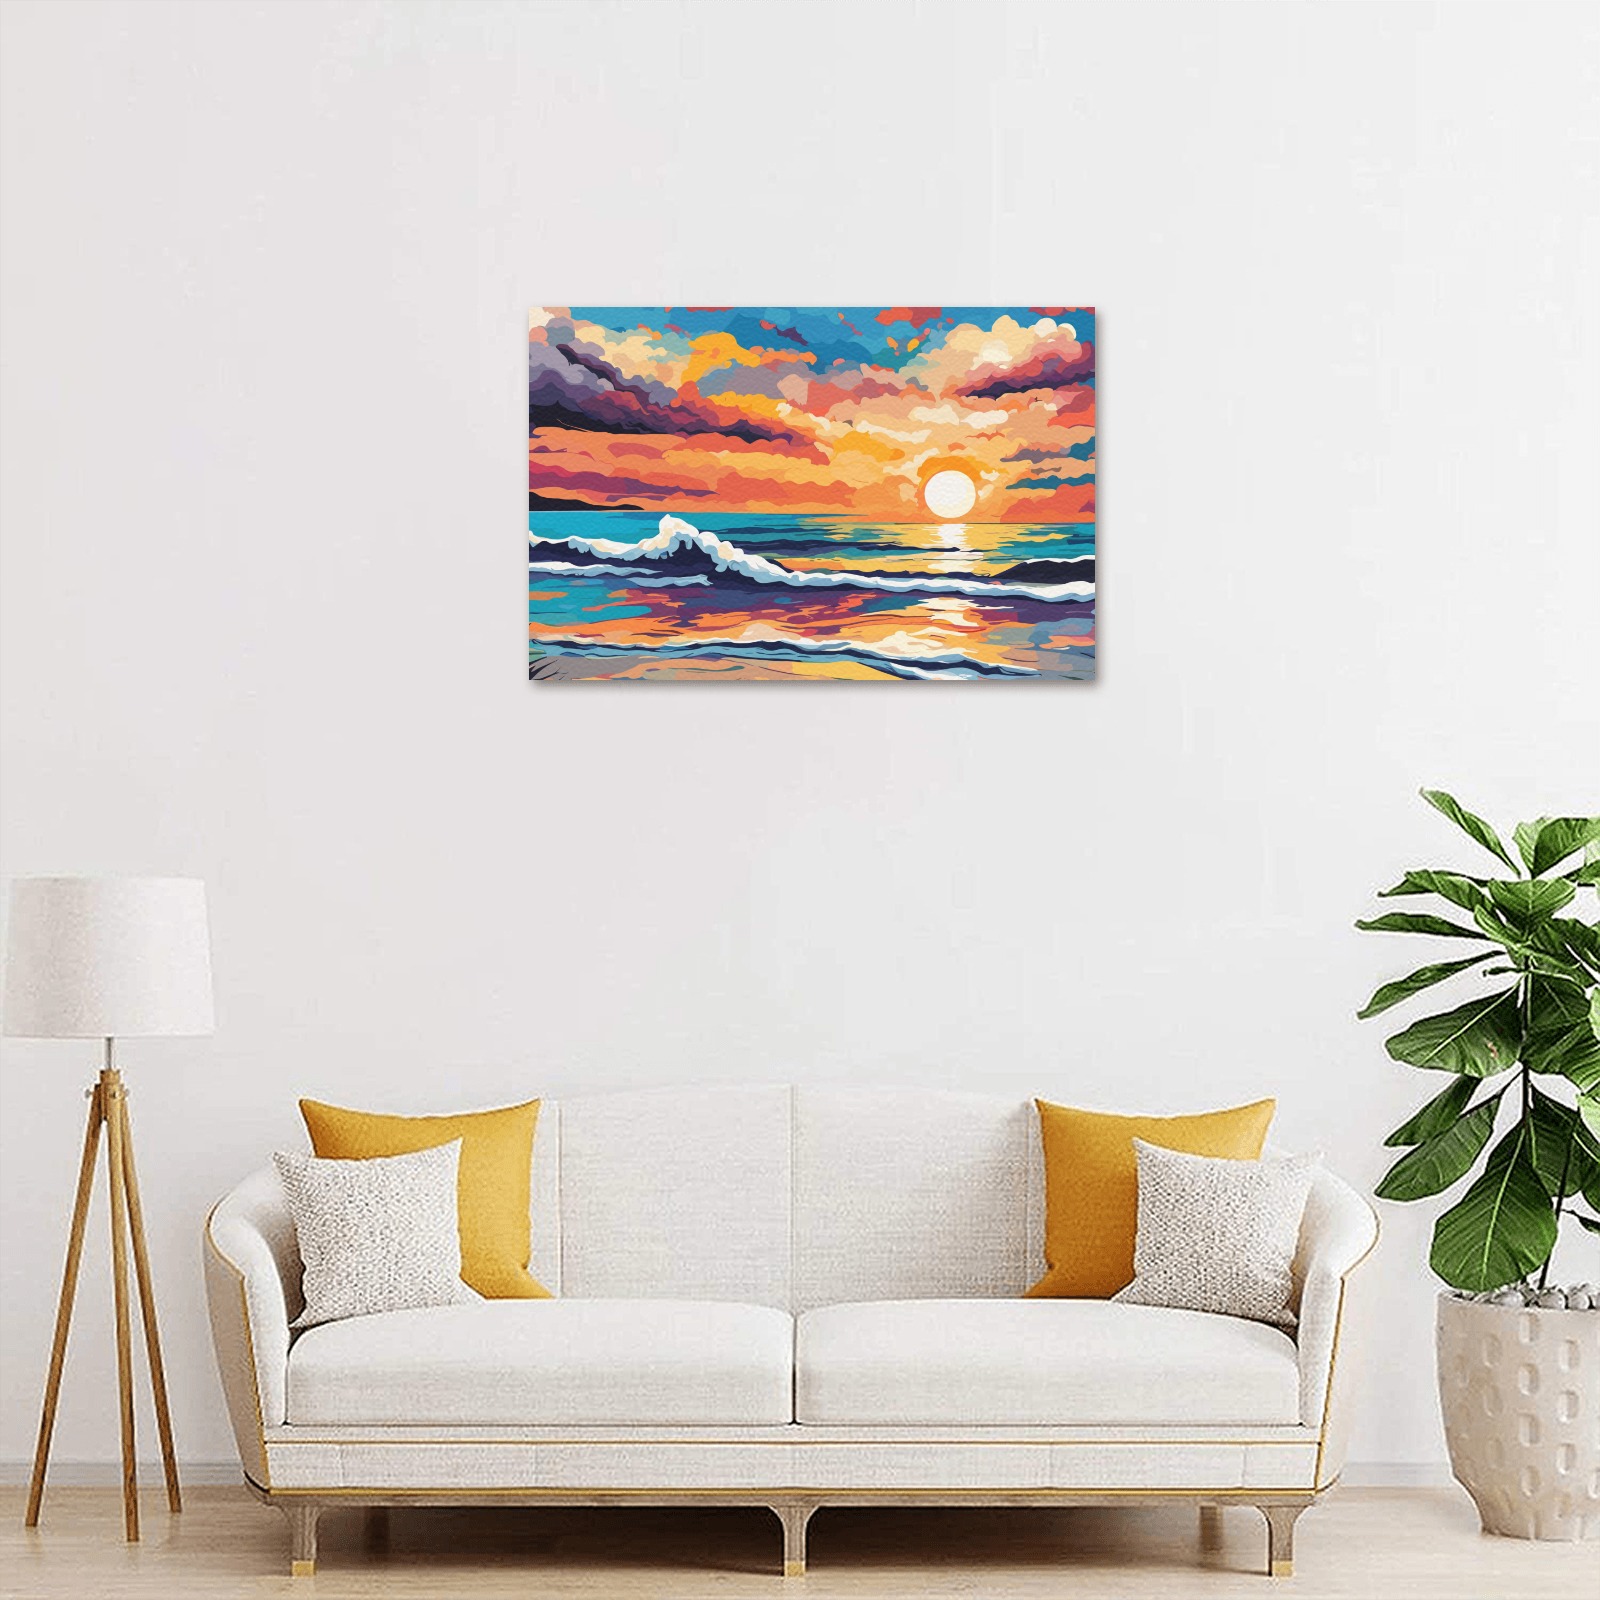 Deserted tropical beach at colorful sunset art. Upgraded Canvas Print 18"x12"